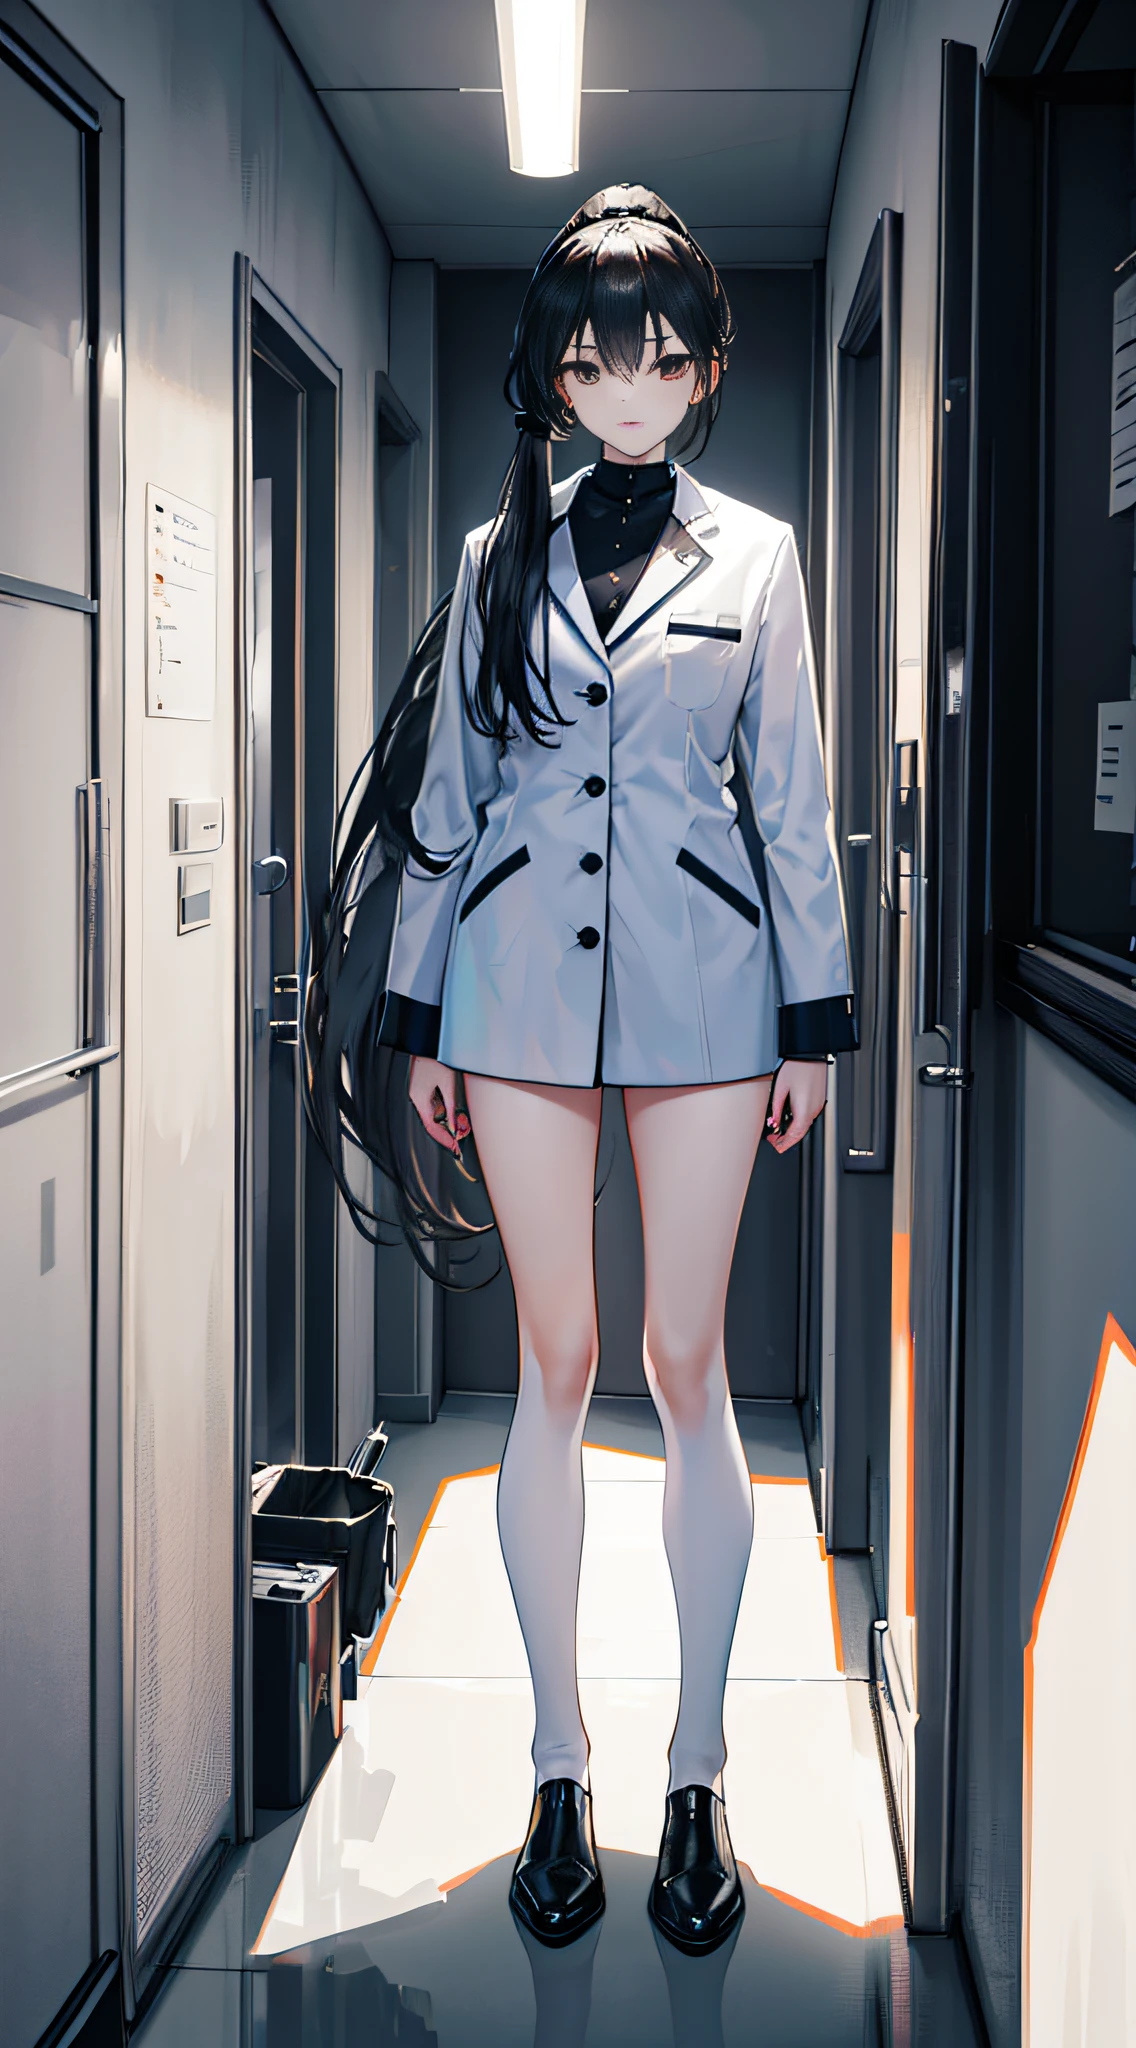 Black hair girl with black eyes, While wearing a white Business suits, Standing in the doorway. she has a ponytail，Long hair ran down her back. white stockings，Black ankle boots. The image should be of the best quality, The resolution is 4K, 8K, or higher. Details should be ultra-detailed and realistic, Even realistic. Lighting should be done professionally, Features studio lighting and clear focus. The colors should be bright，The painting should have a physically based rendering.